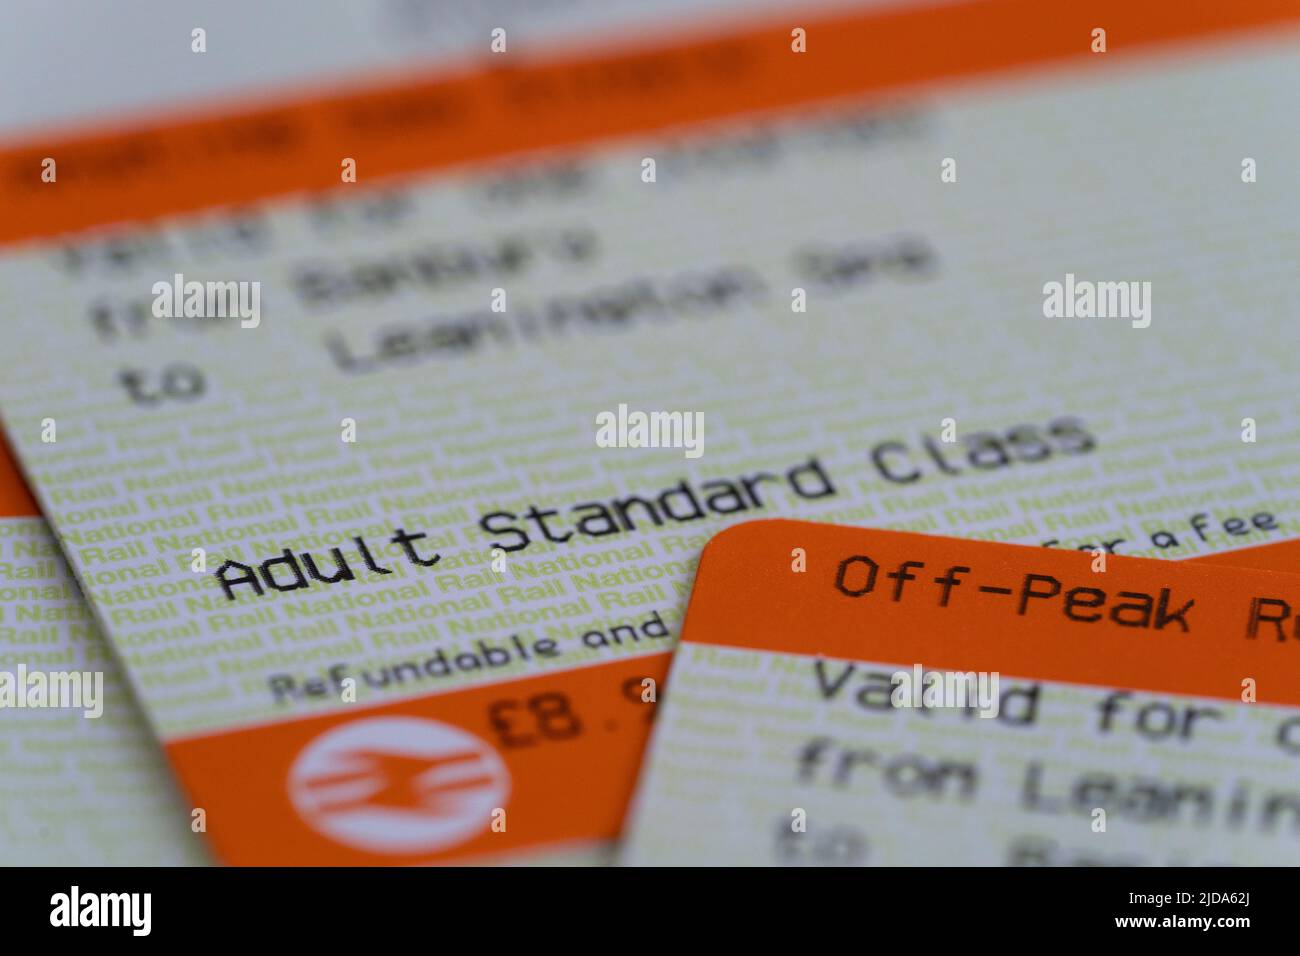 Closeup on UK Adult Standard Class Rail tickets. Theme - railway fare increases, rail ticket offices, English train tickets, travel price increases Stock Photo